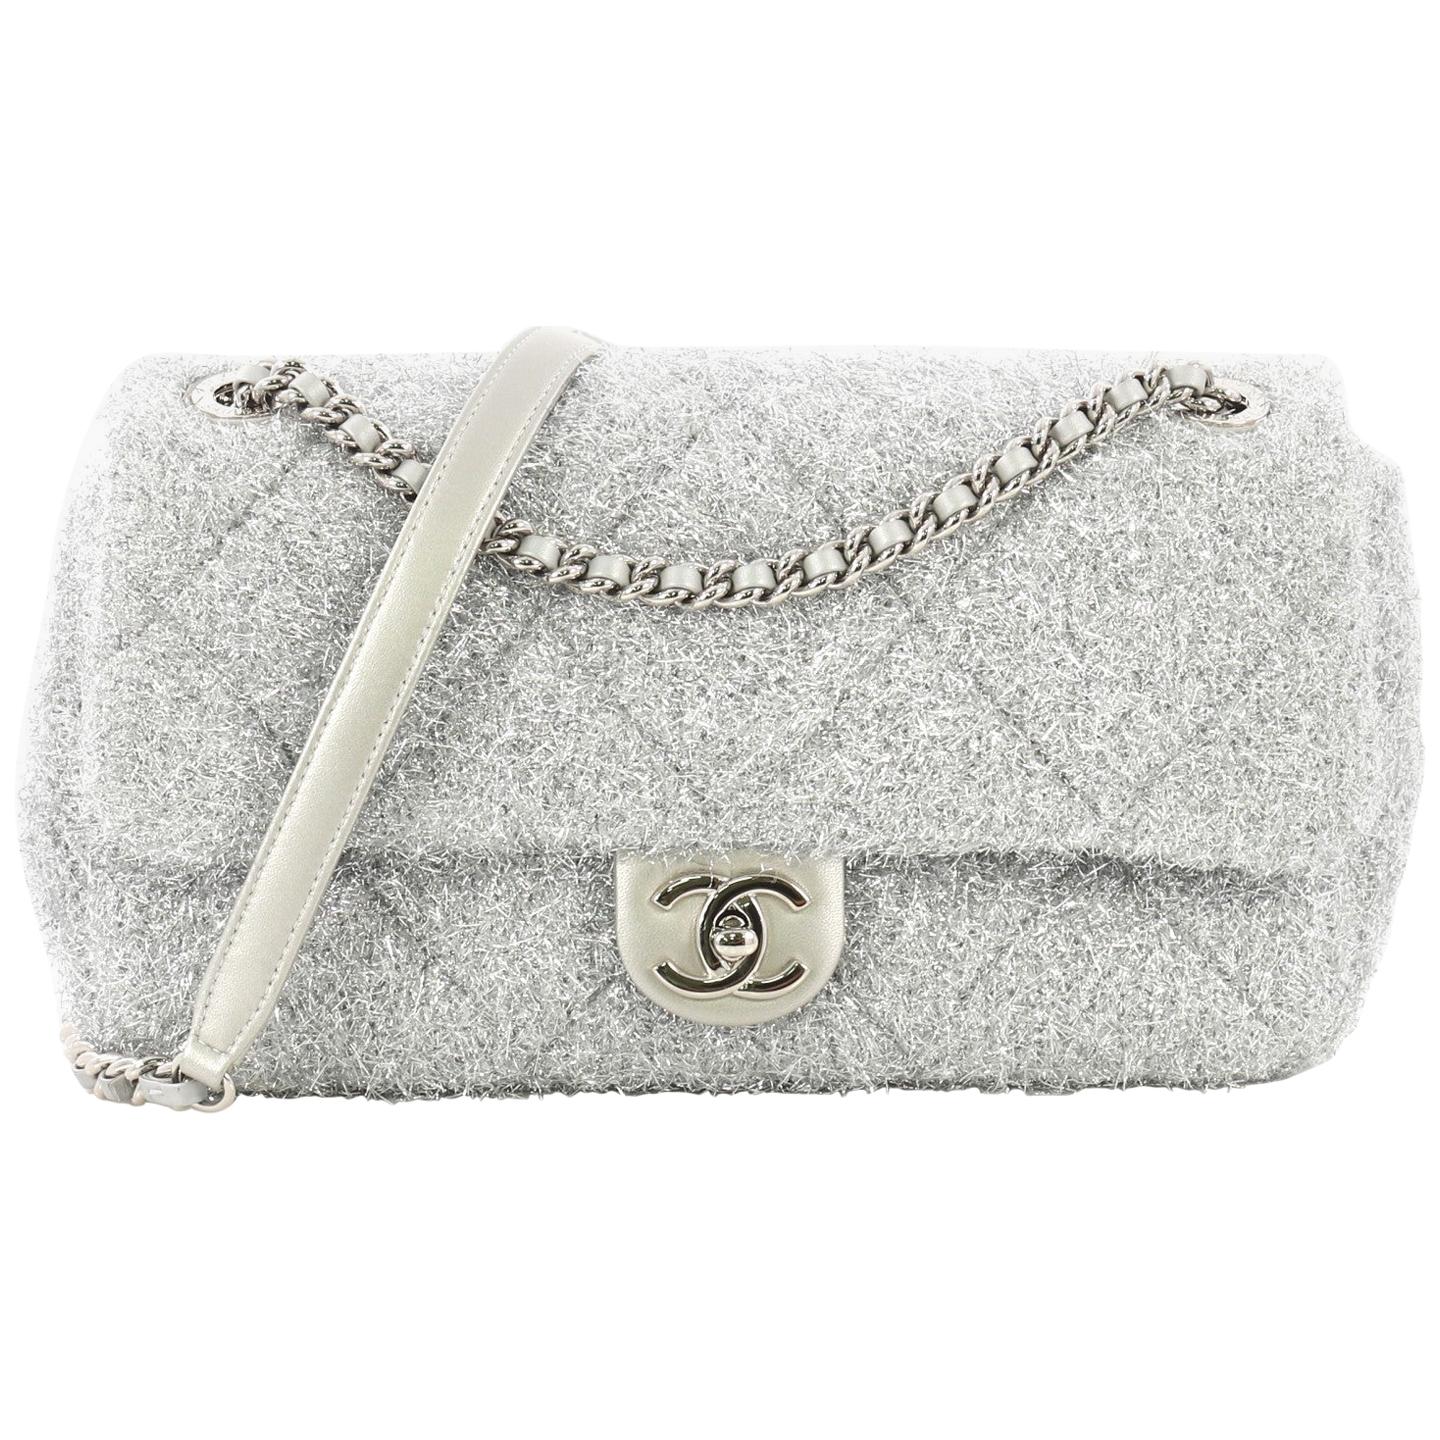 Chanel Metallic Quilted Ice Cube On The Rocks Flap Bag